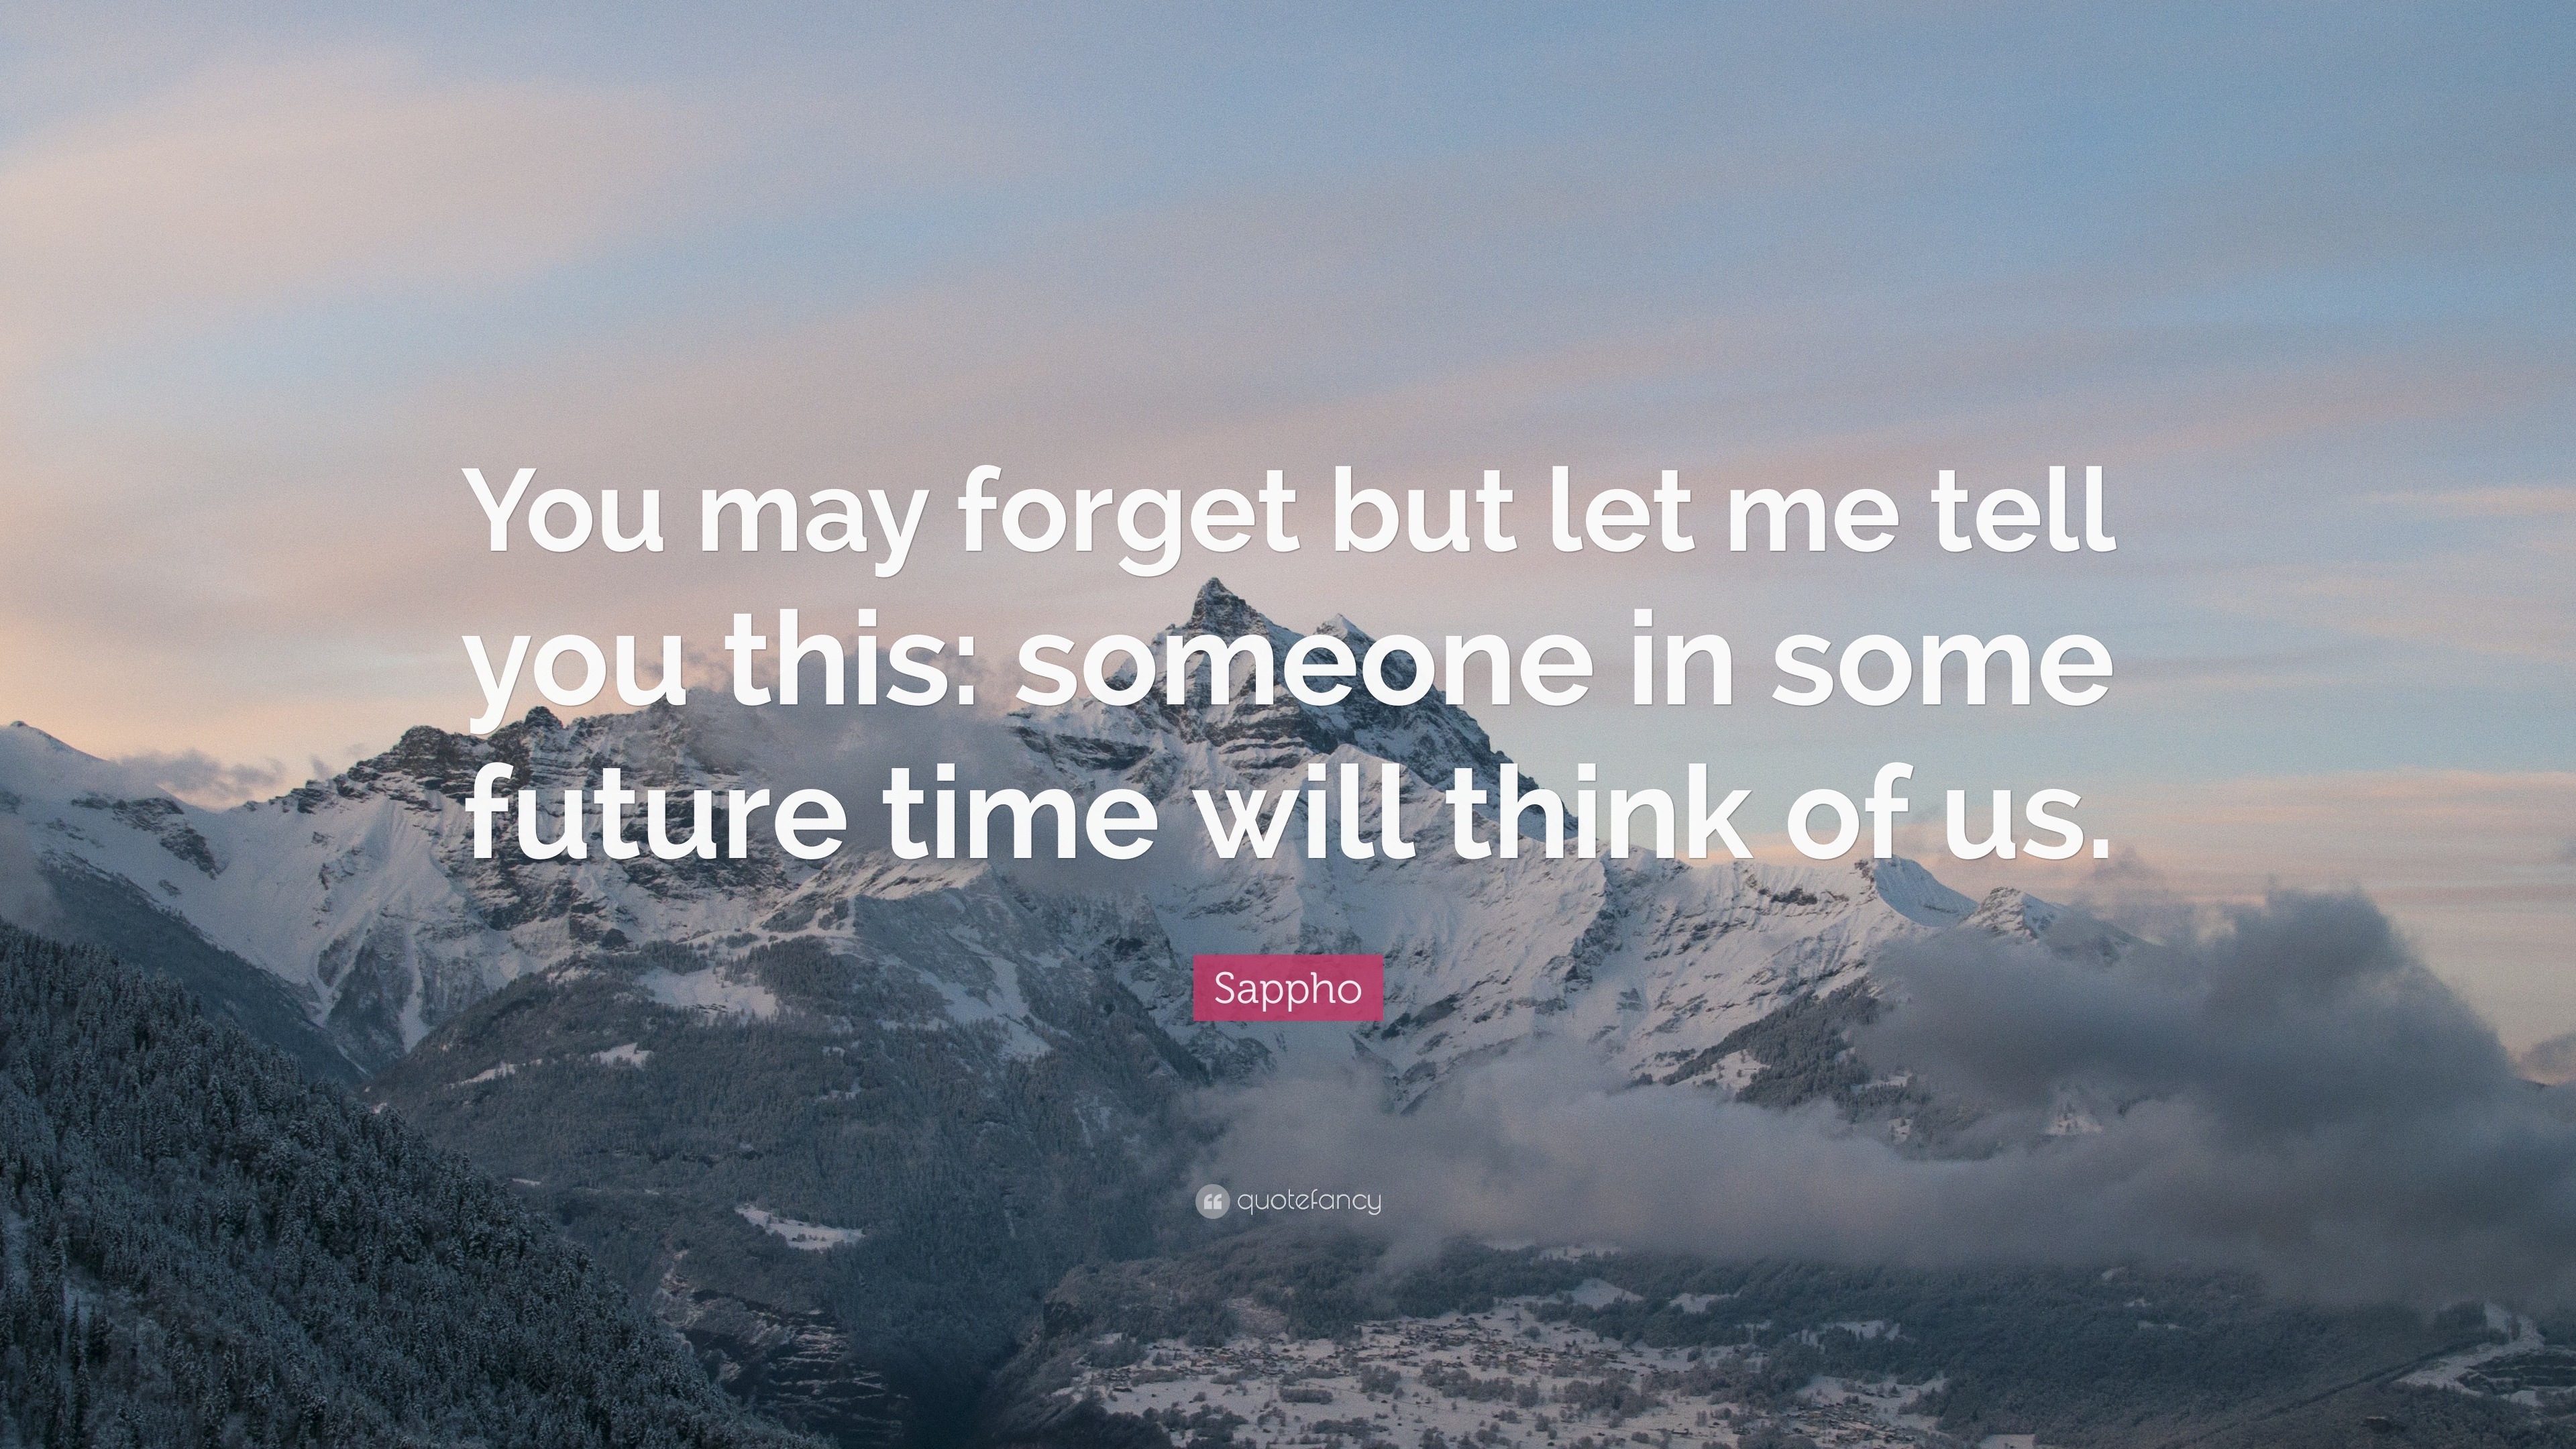 Sappho Quote: "You may forget but let me tell you this ...